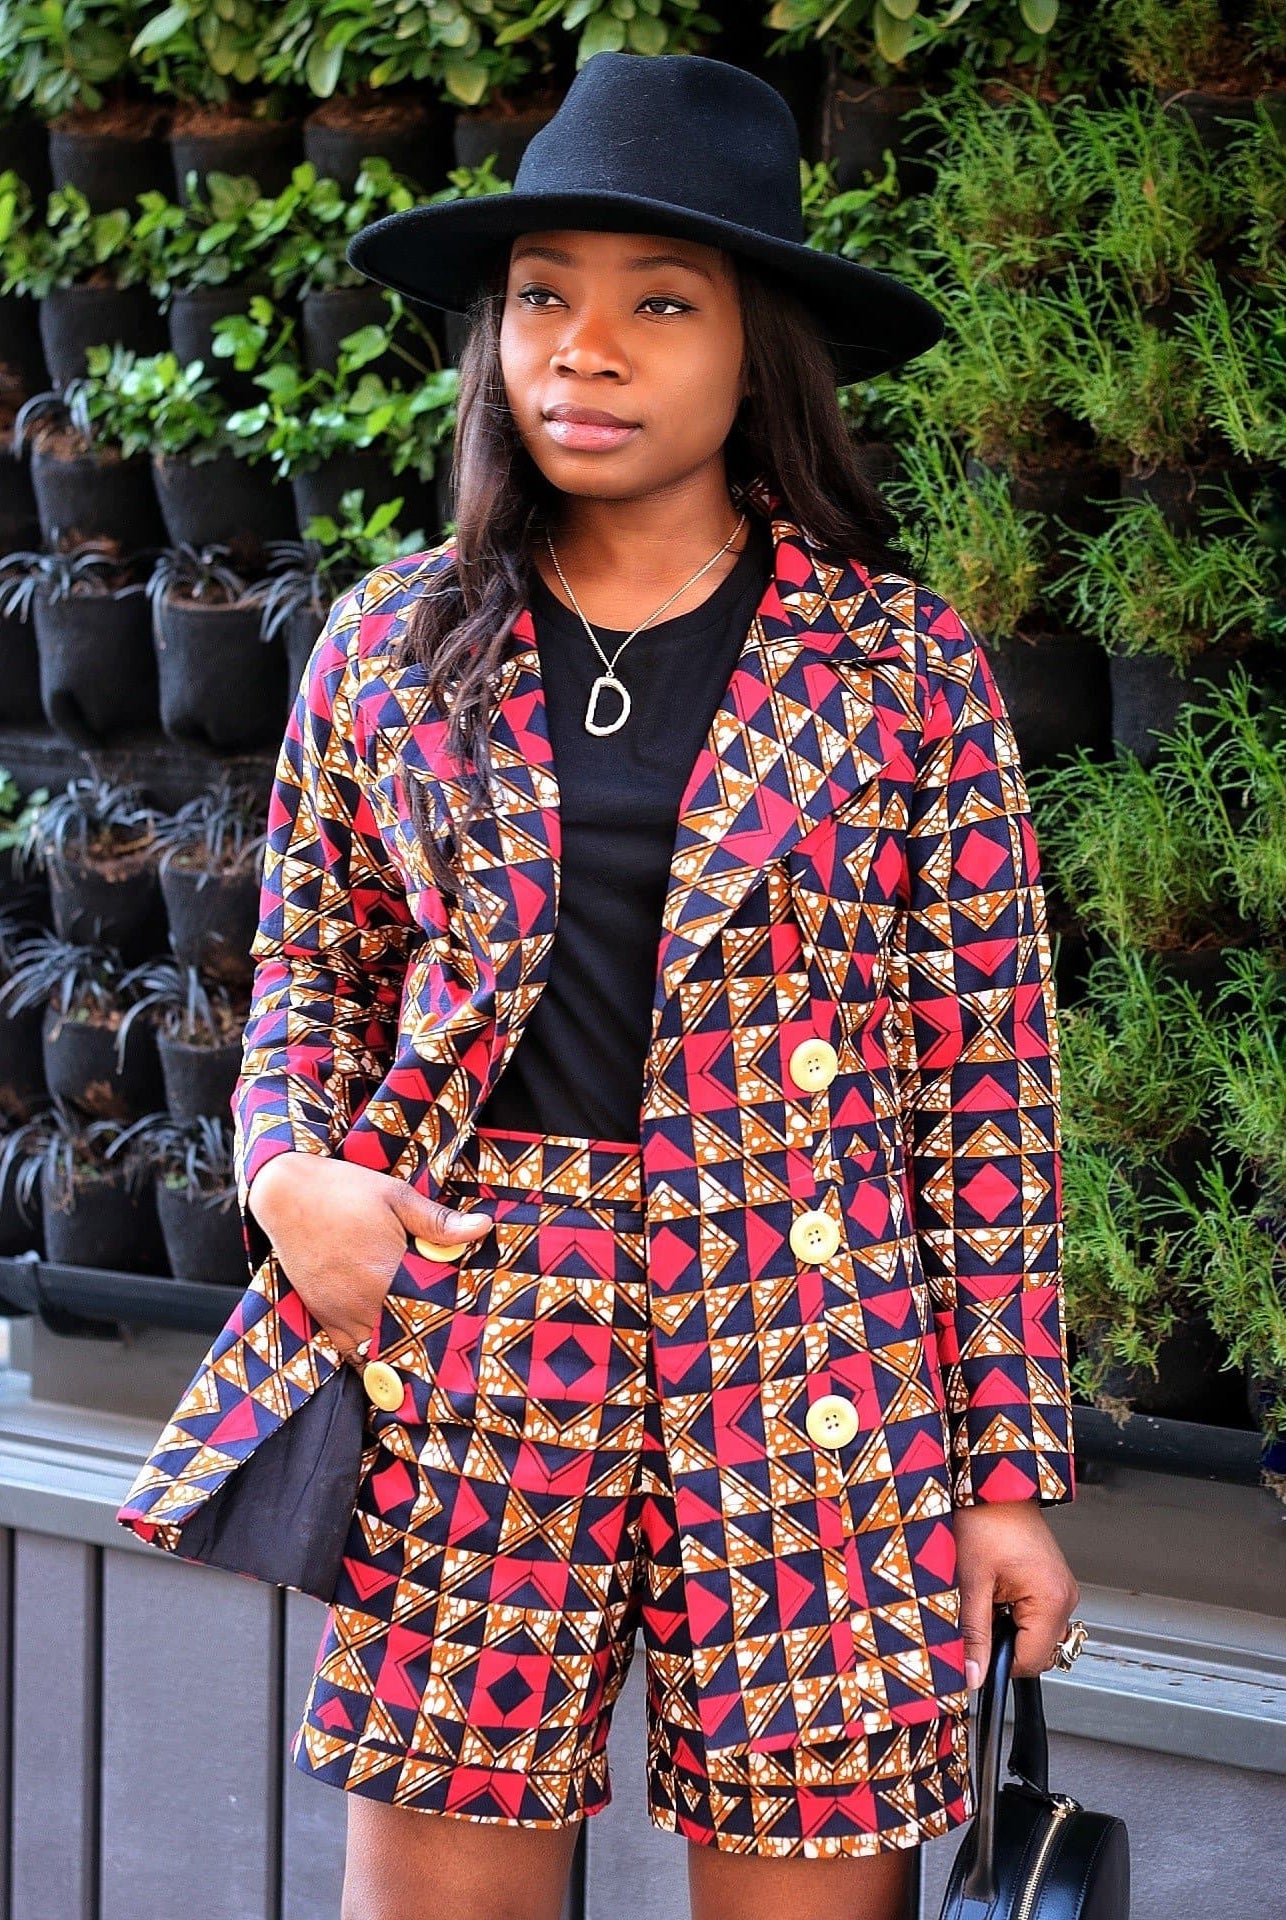 African Print Blazer | African print Jacket | African print Bomber Jacket | African Print Outerwear | Fall Fashion for African women | sustainable African Fashion | recycled African print clothing | Ethically sourced fashion | ethically sourced clothing | handmade clothing | African clothing for women | Ankara jacket | Tribal prints kimono | Floral African print clothing | Cotton Blazer | African print workwear | African clothing UK | Black-owned | Matching African Print outfit